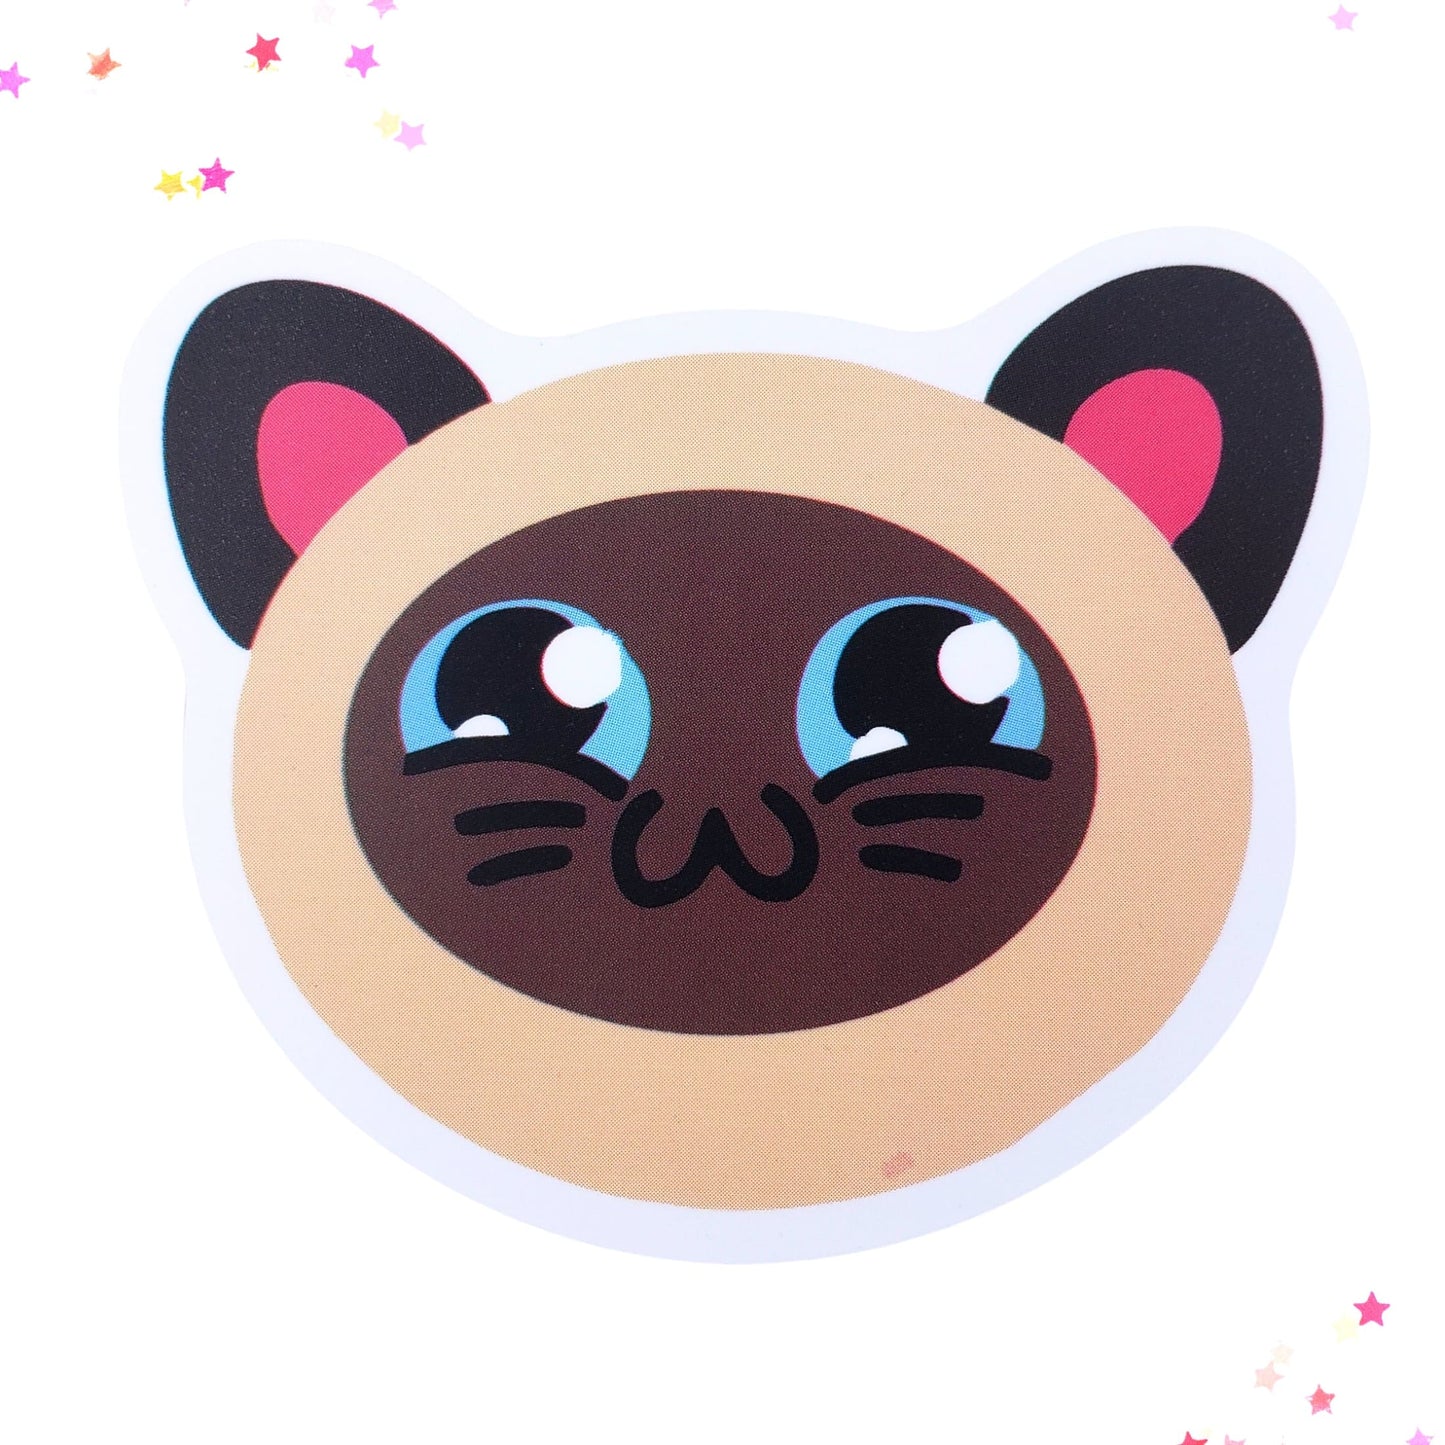 Siamese Kitty Waterproof Sticker | Cookie Cat from Confetti Kitty, Only 1.00